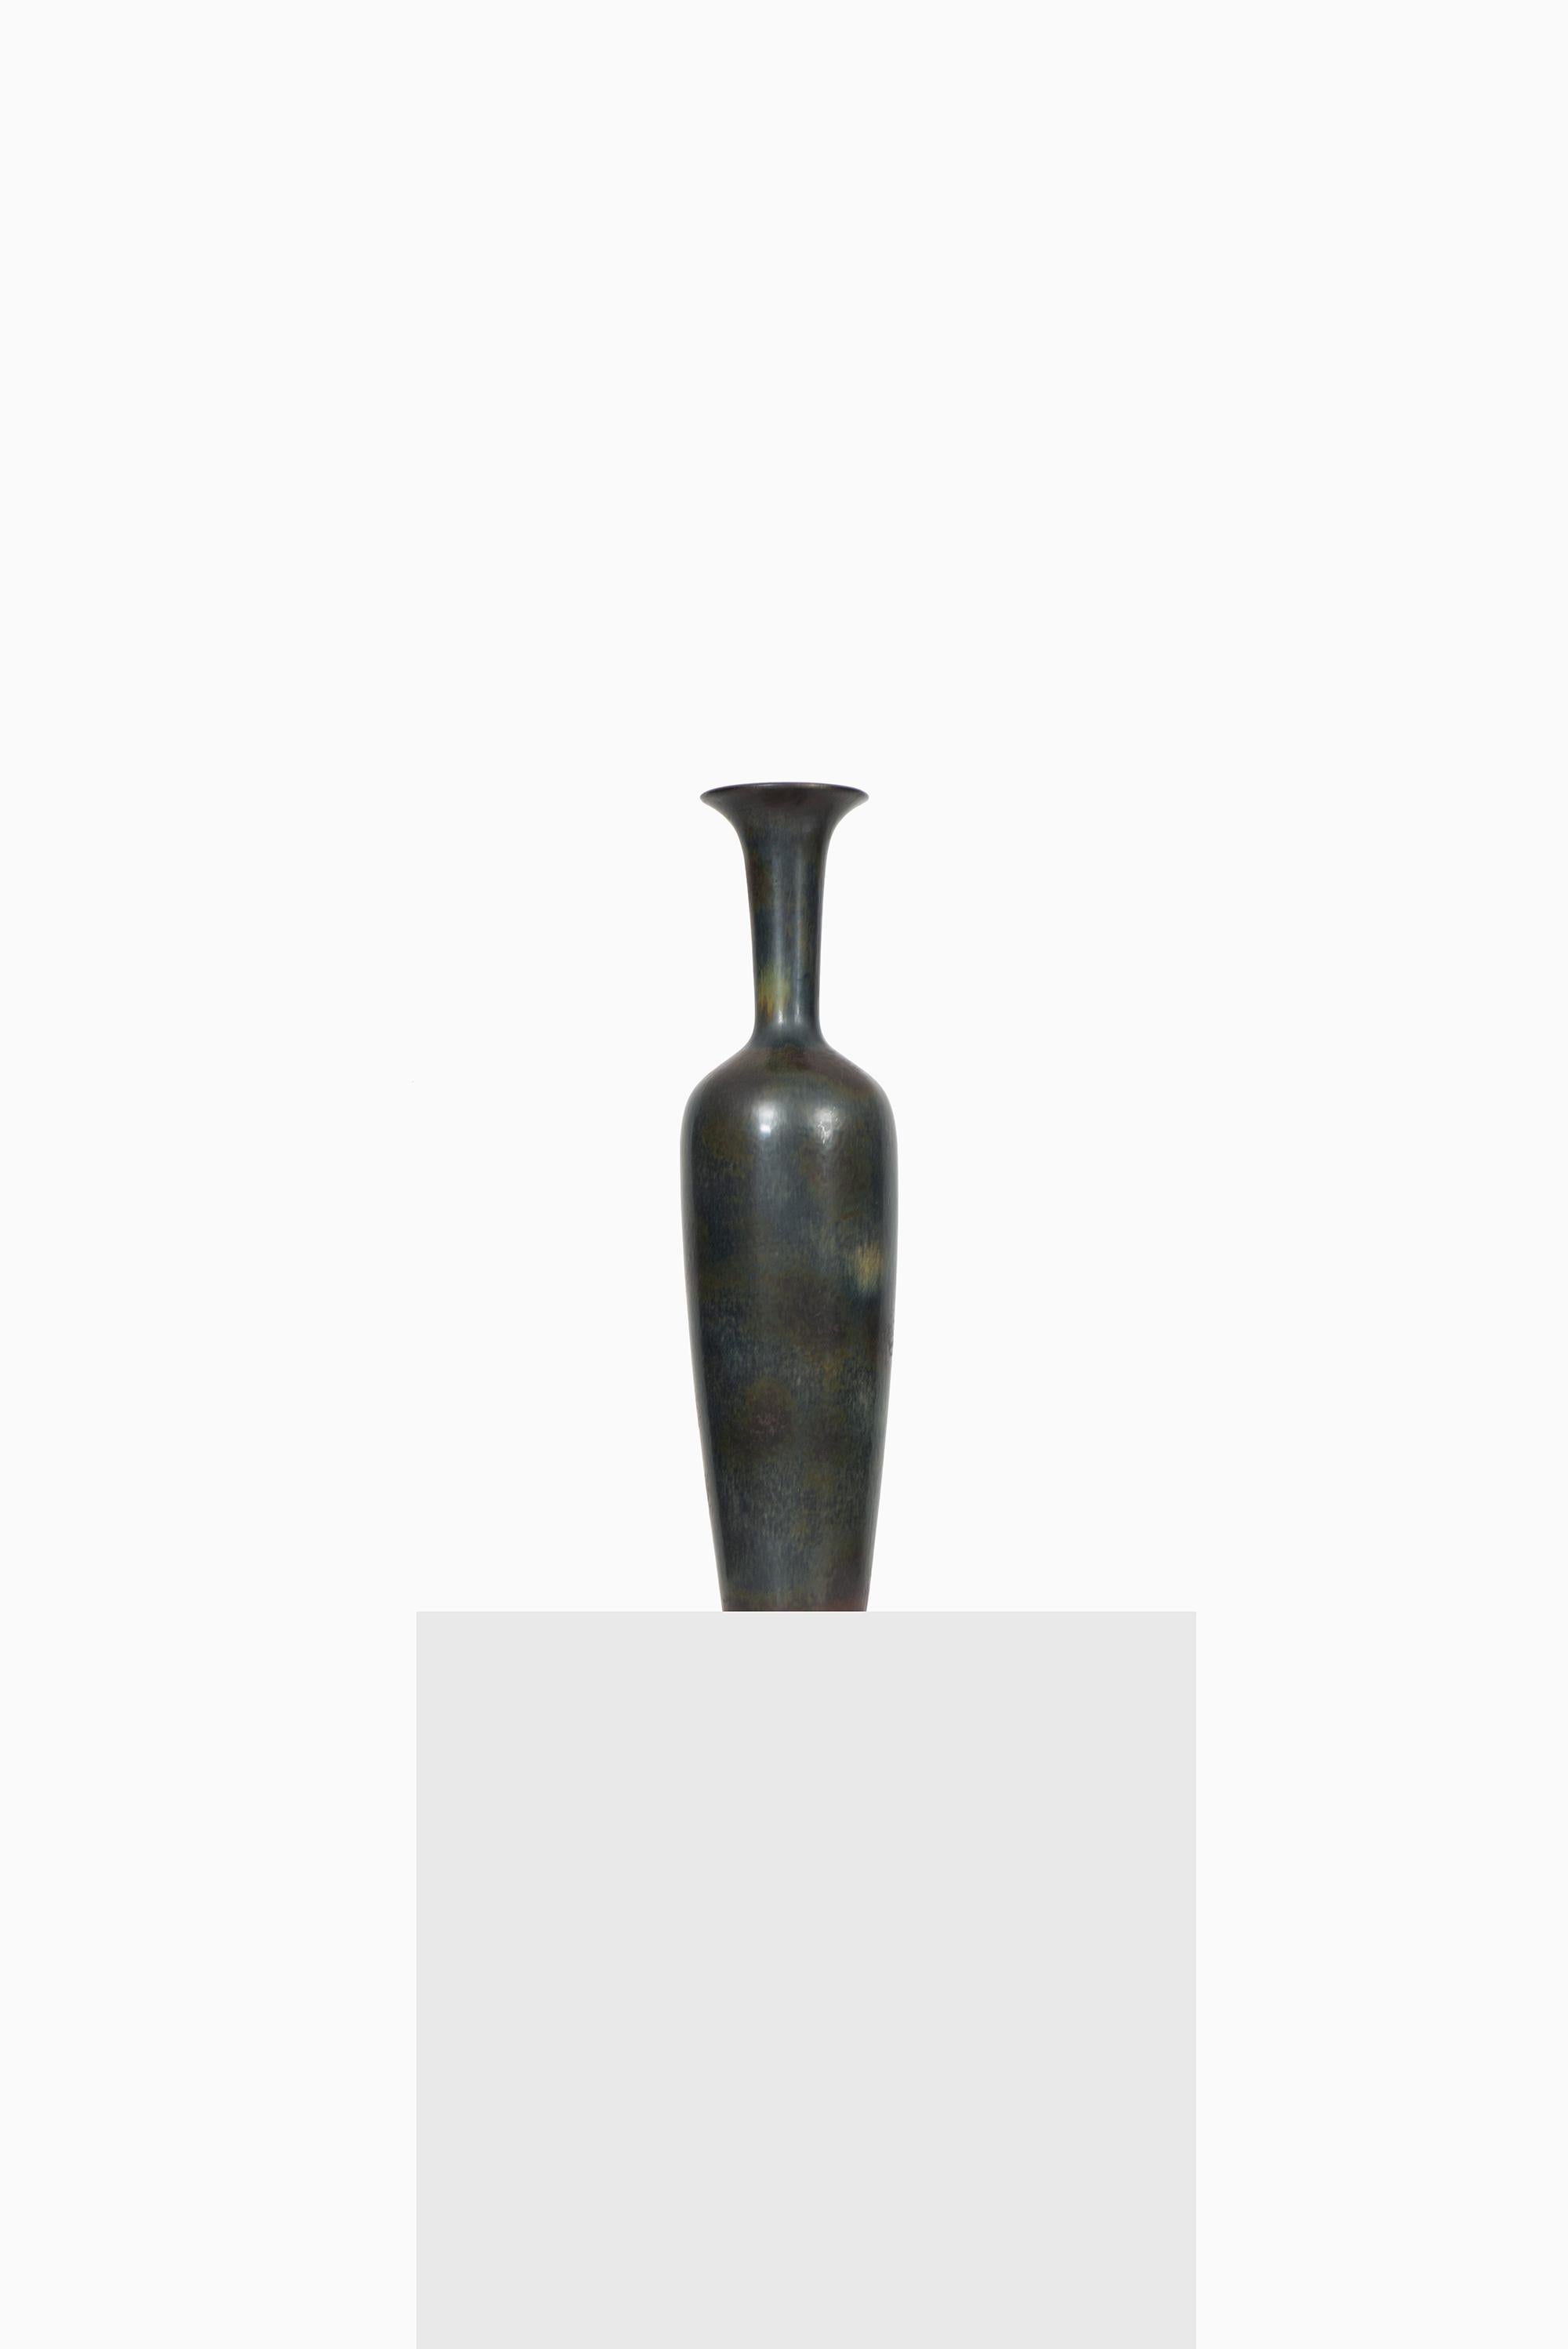 Rare and large ceramic floor vase designed by Gunnar Nylund. Produced by Rörstrand in Sweden.